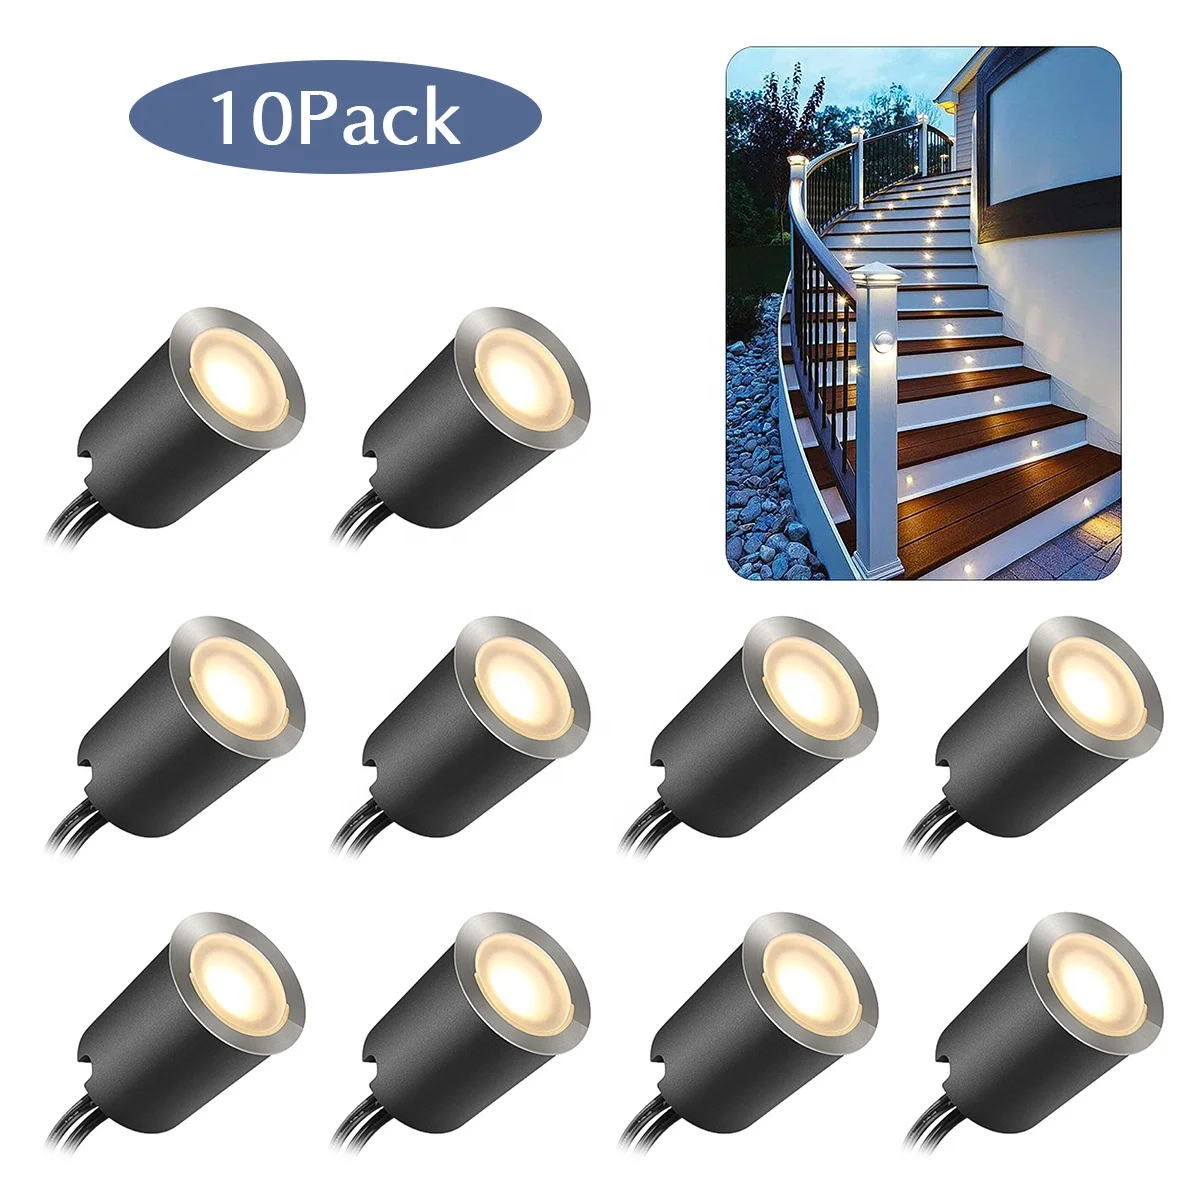 10pcs LED deck lights with Protecting Shell 12V Low Voltage for Garden Yard Steps Stair Patio Floor Decoration Decking Lights